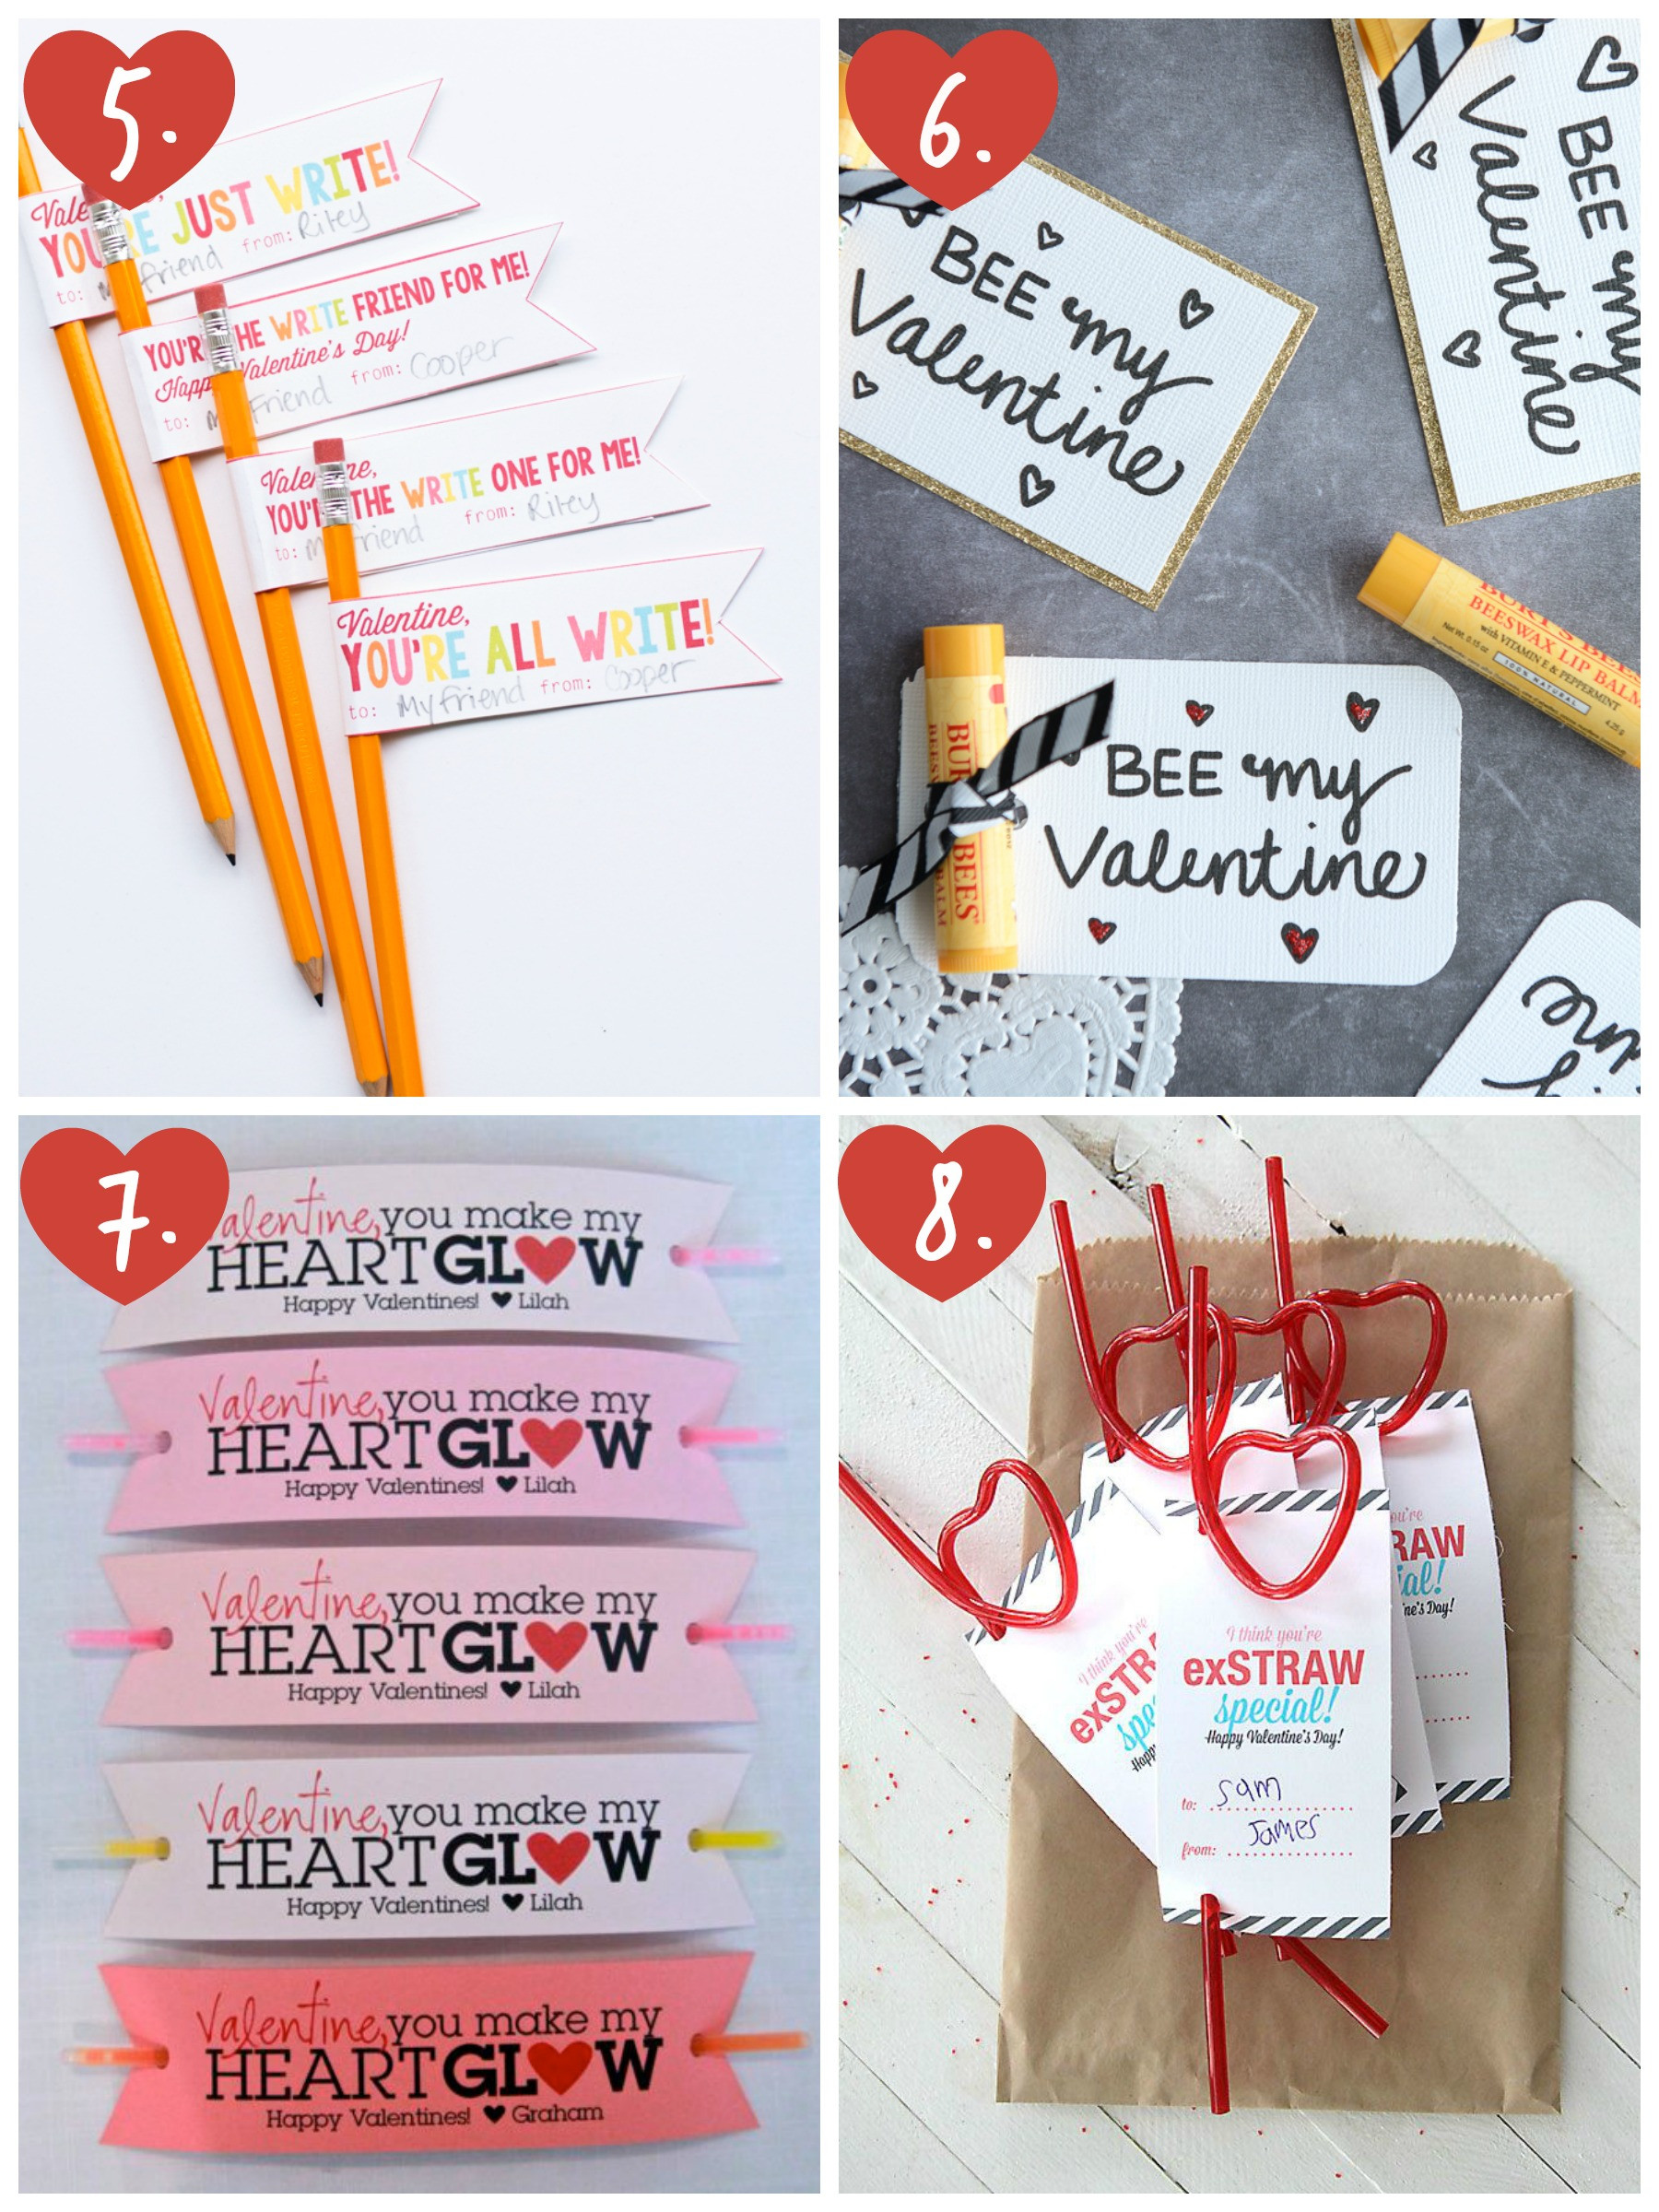 Just Started Dating Valentines Gift Ideas
 8 Punny Valentine Ideas FREE printables